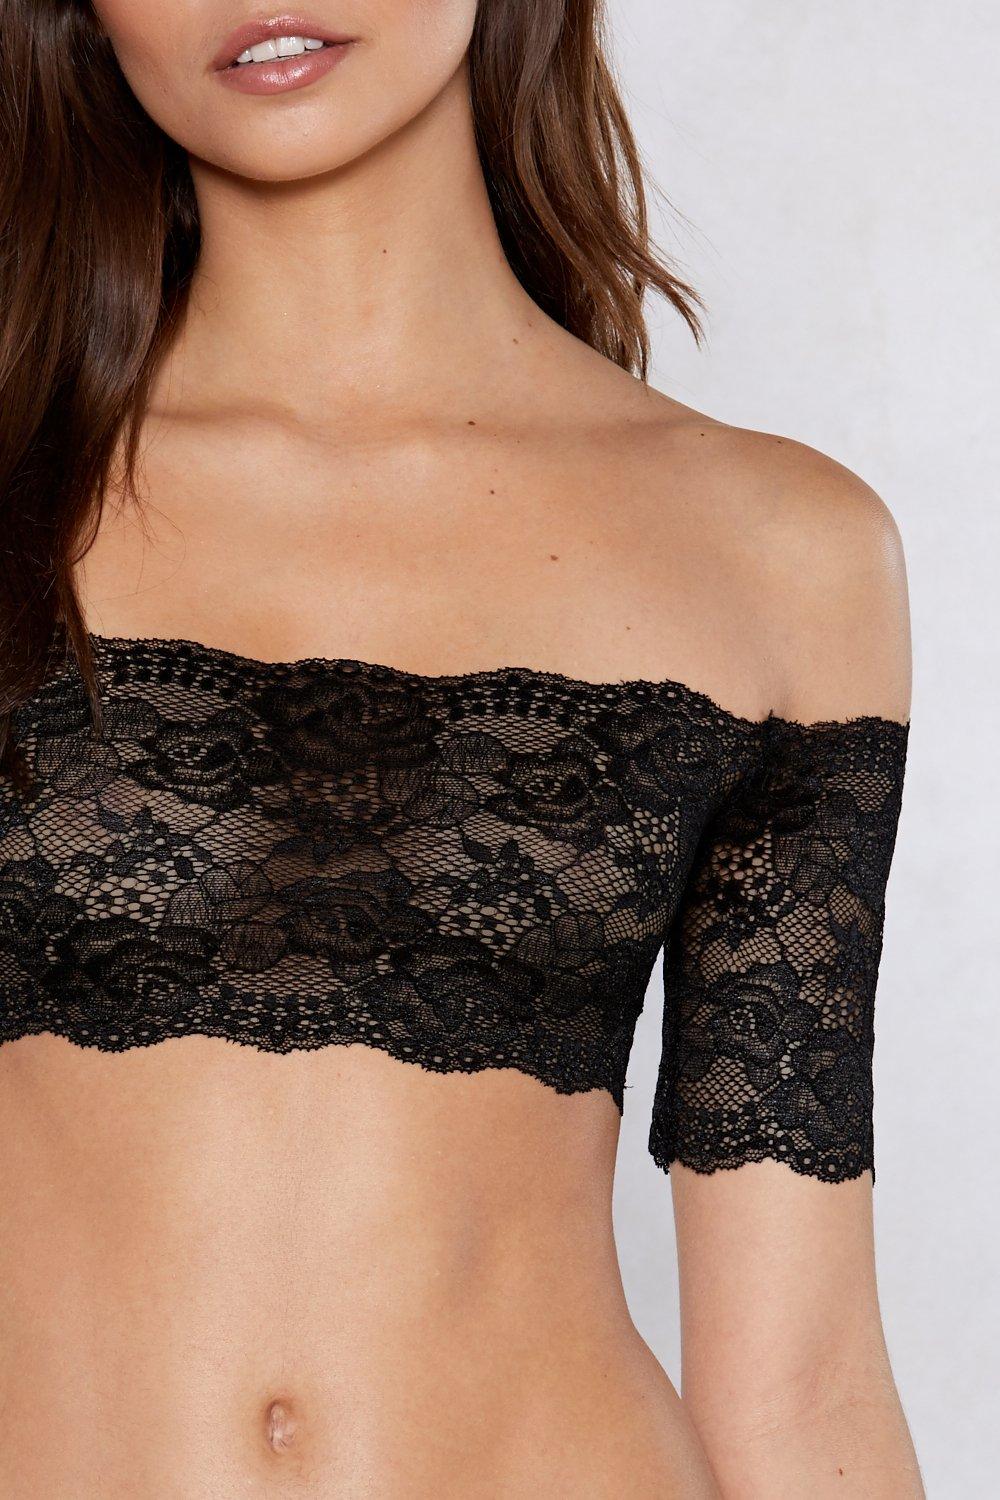 What's Your Best Off-the-Shoulder Bralette and Panty Set